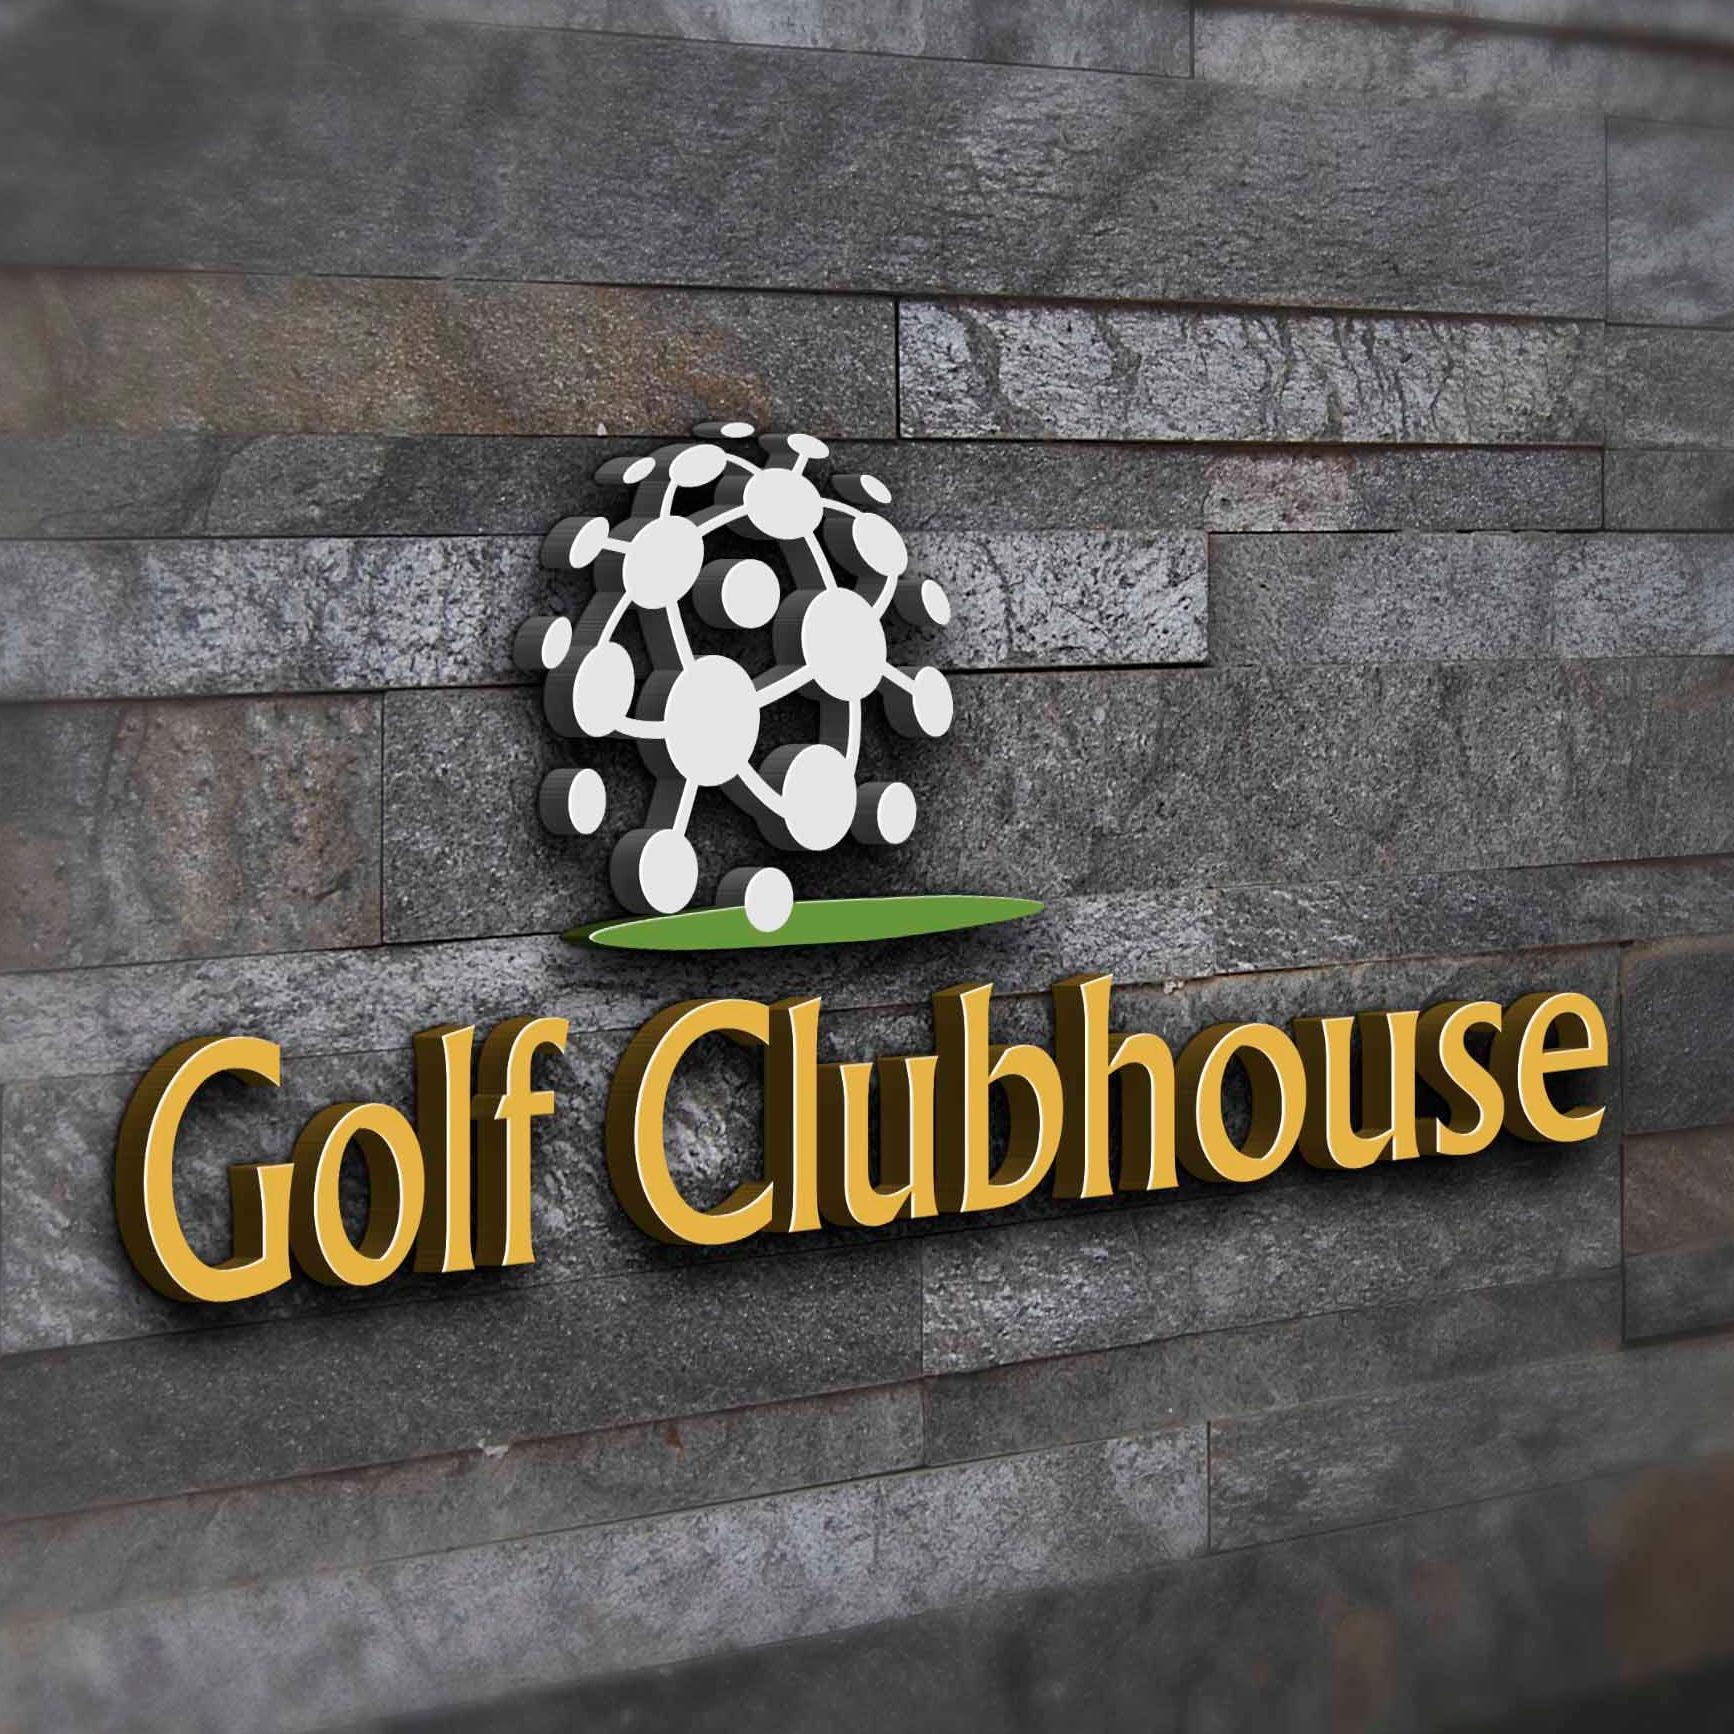 We review the latest golf equipment, golf memberships & courses. We love our golf & we are always looking for new golfers to review equipment for us.